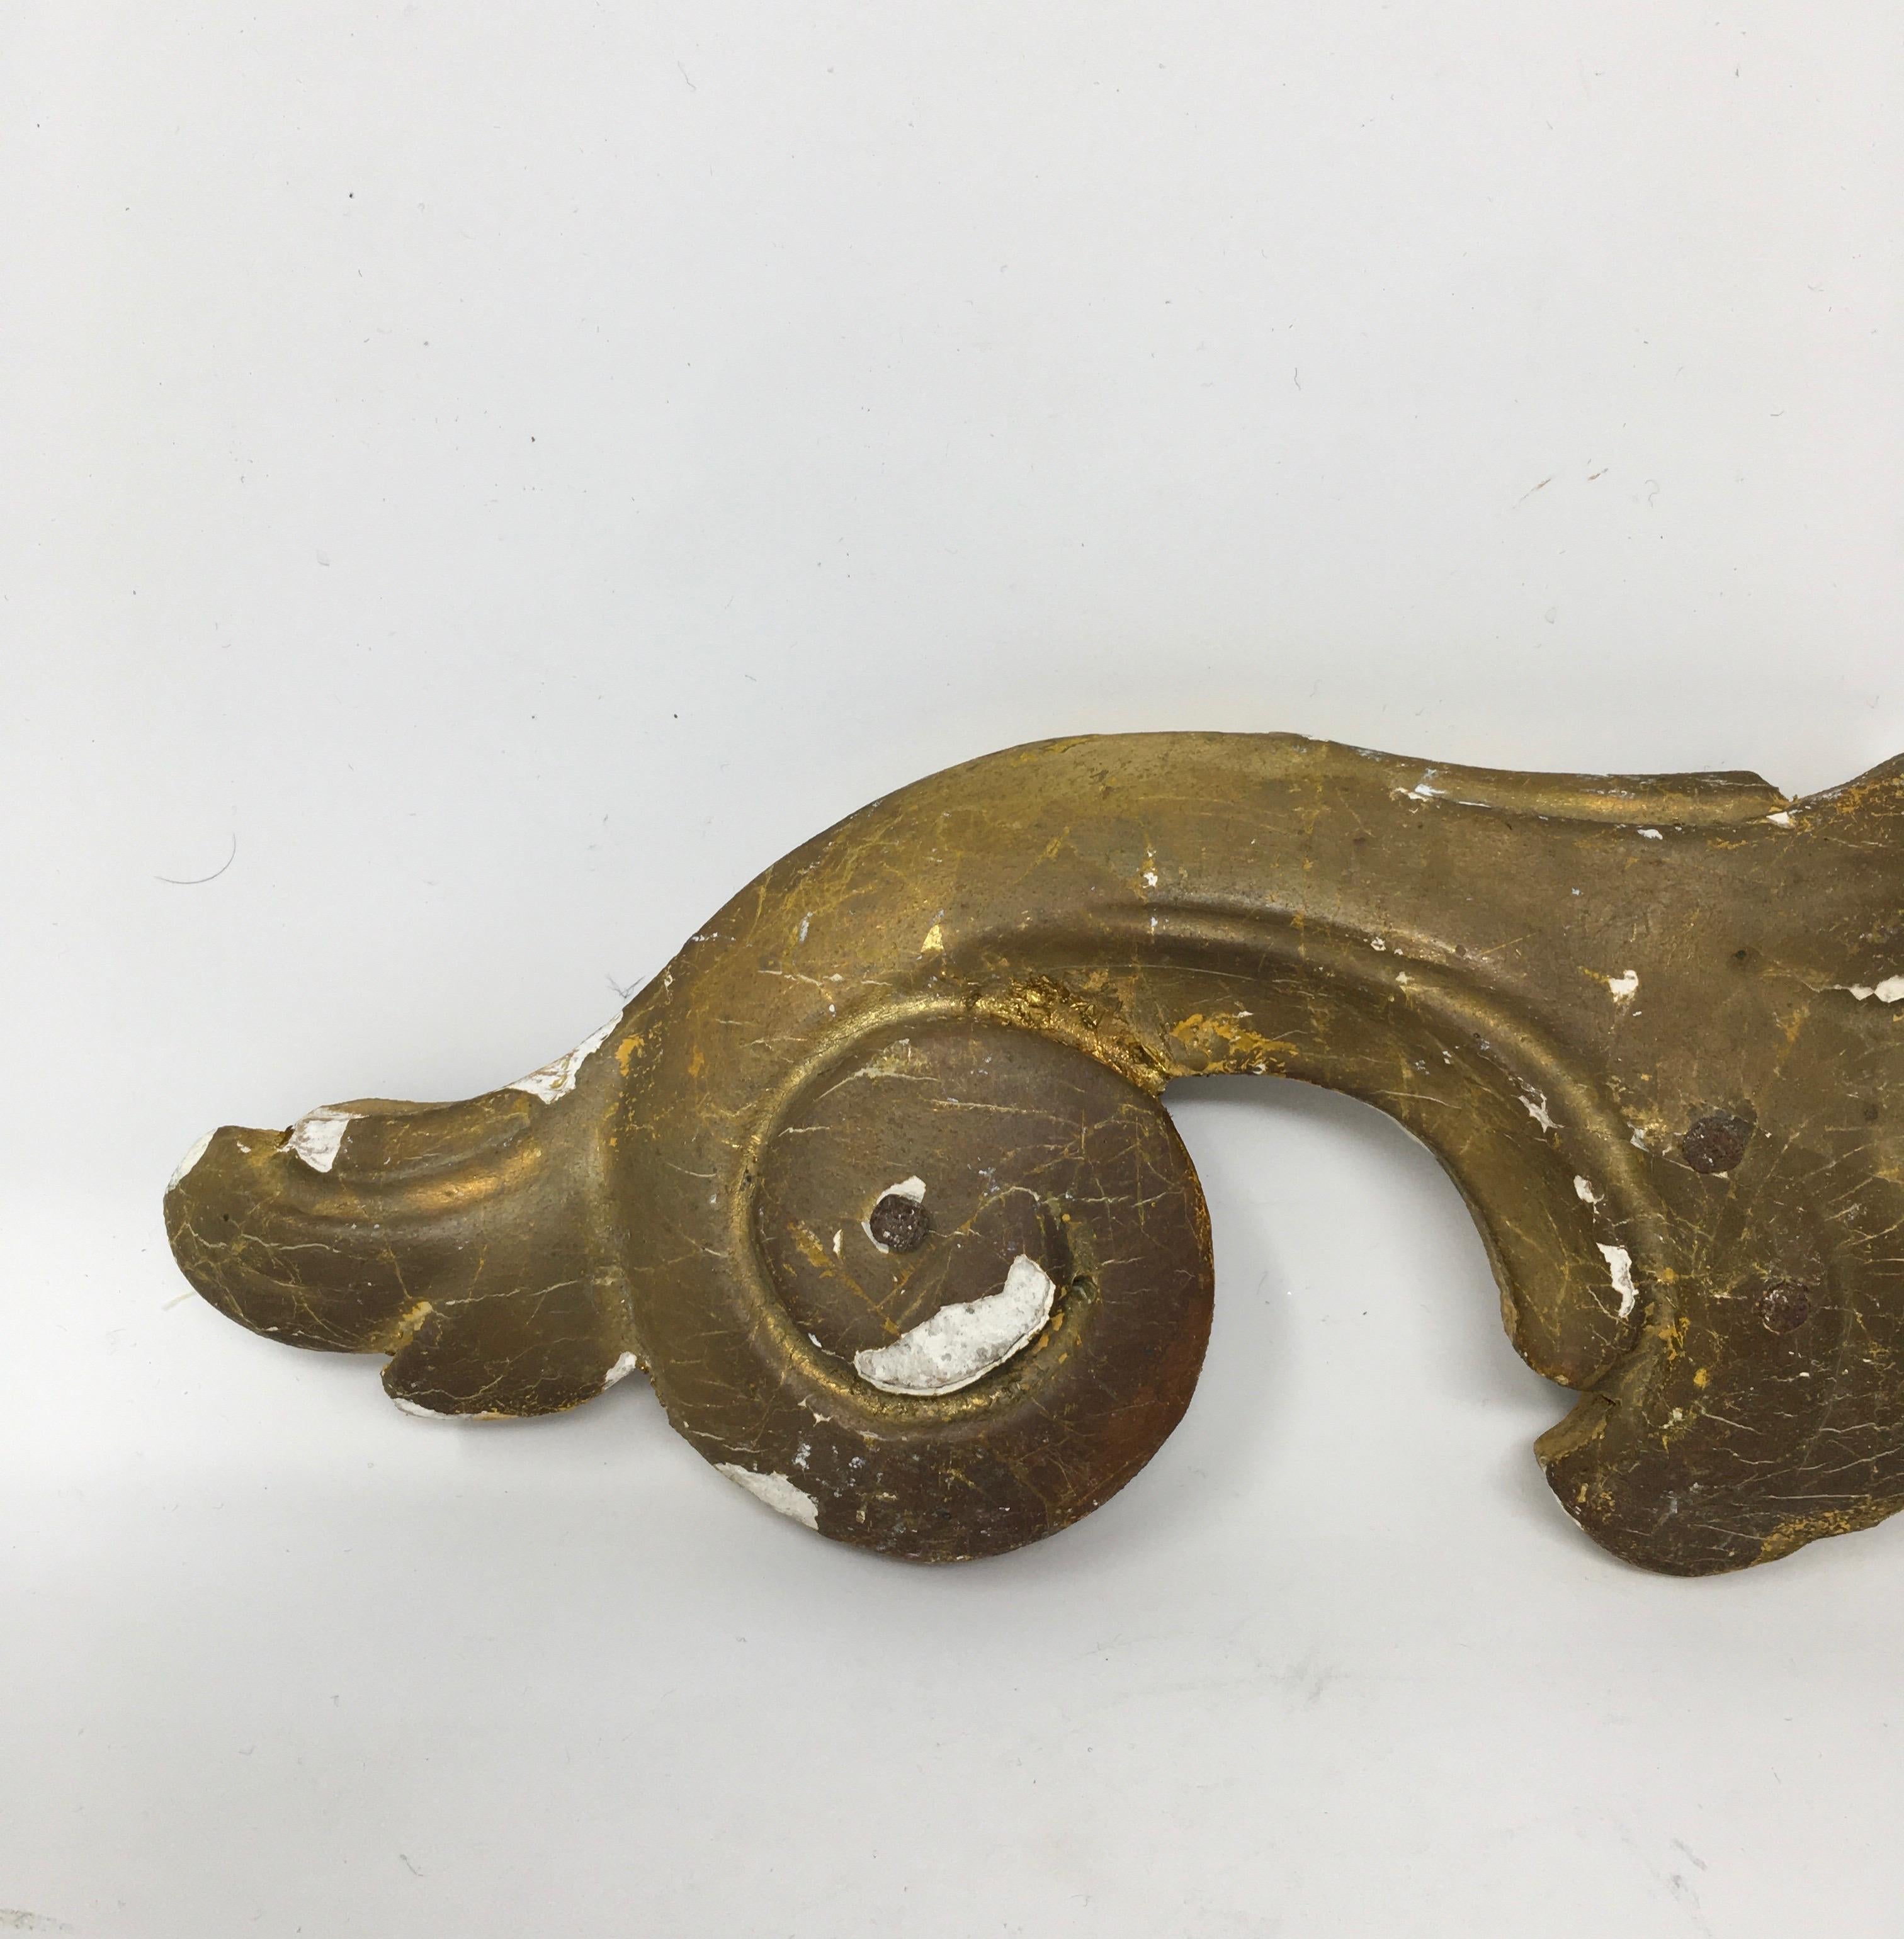 Found in the South of France, this hand carved gilt wood architectural fragment depicts a scroll design. The fragment is missing some of the gold patina that adds to the character. The piece would be great mounted as a sculptural piece on an iron or